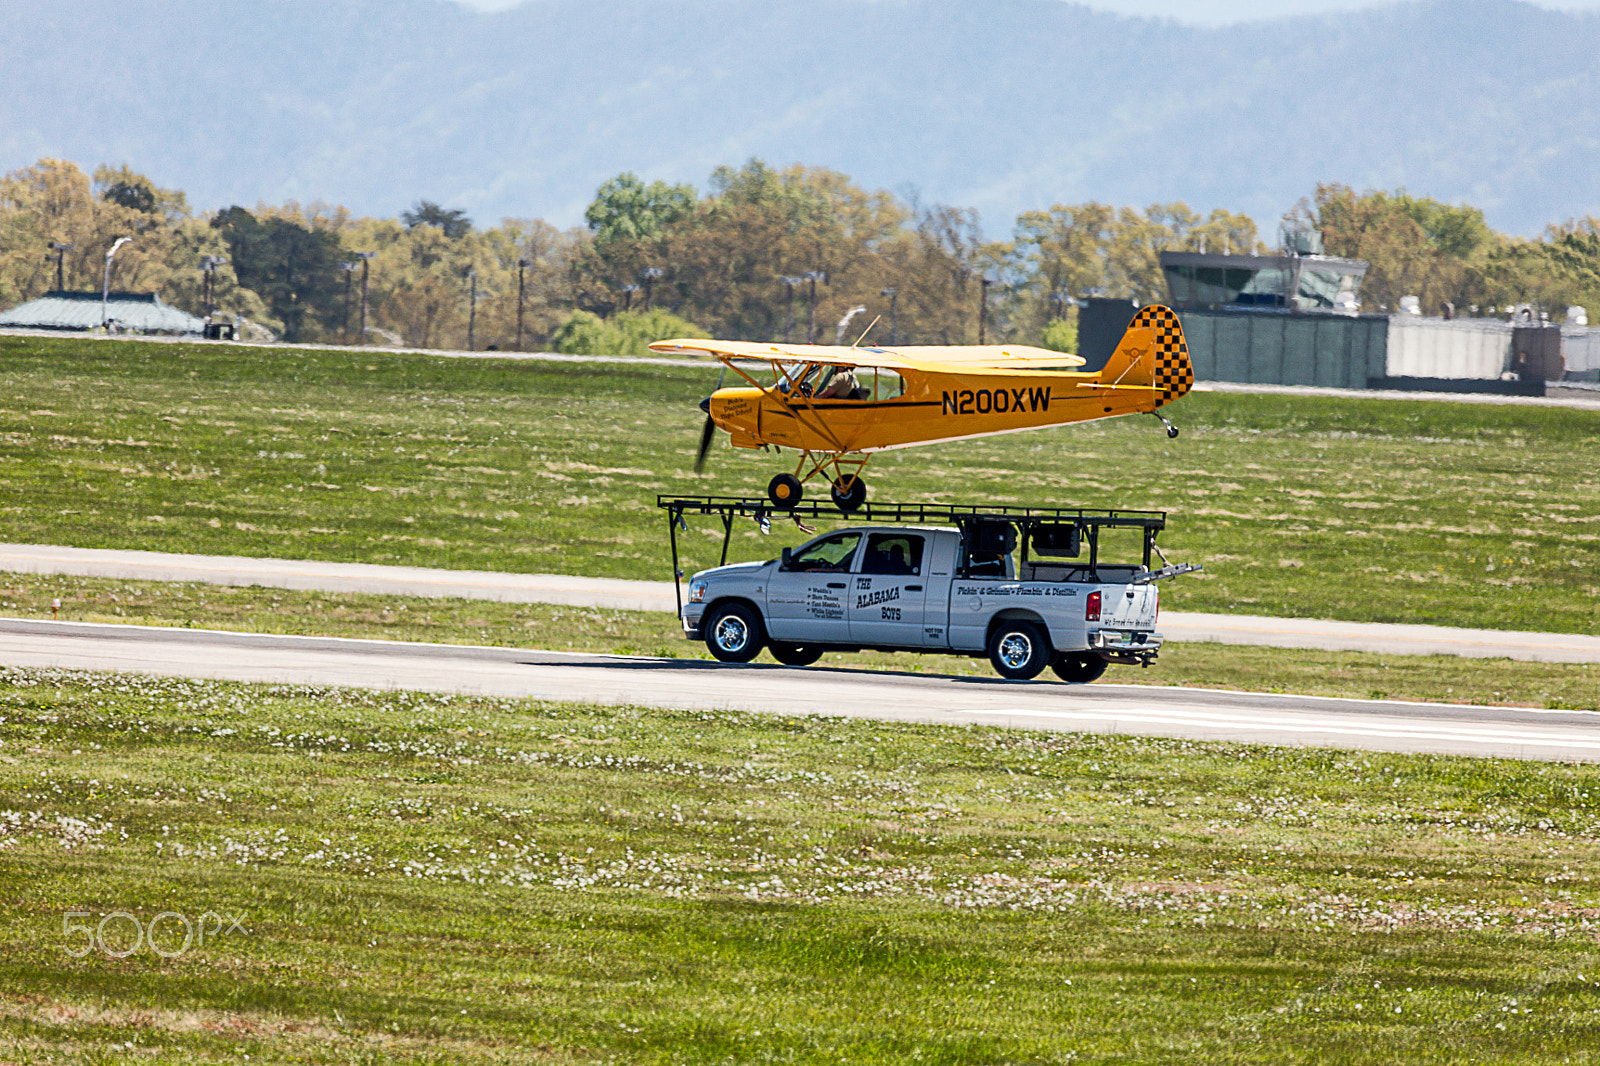 Canon EOS 5DS + Sigma 150-600mm F5-6.3 DG OS HSM | C sample photo. Greg koontz airshows landing on pickup 2 photography